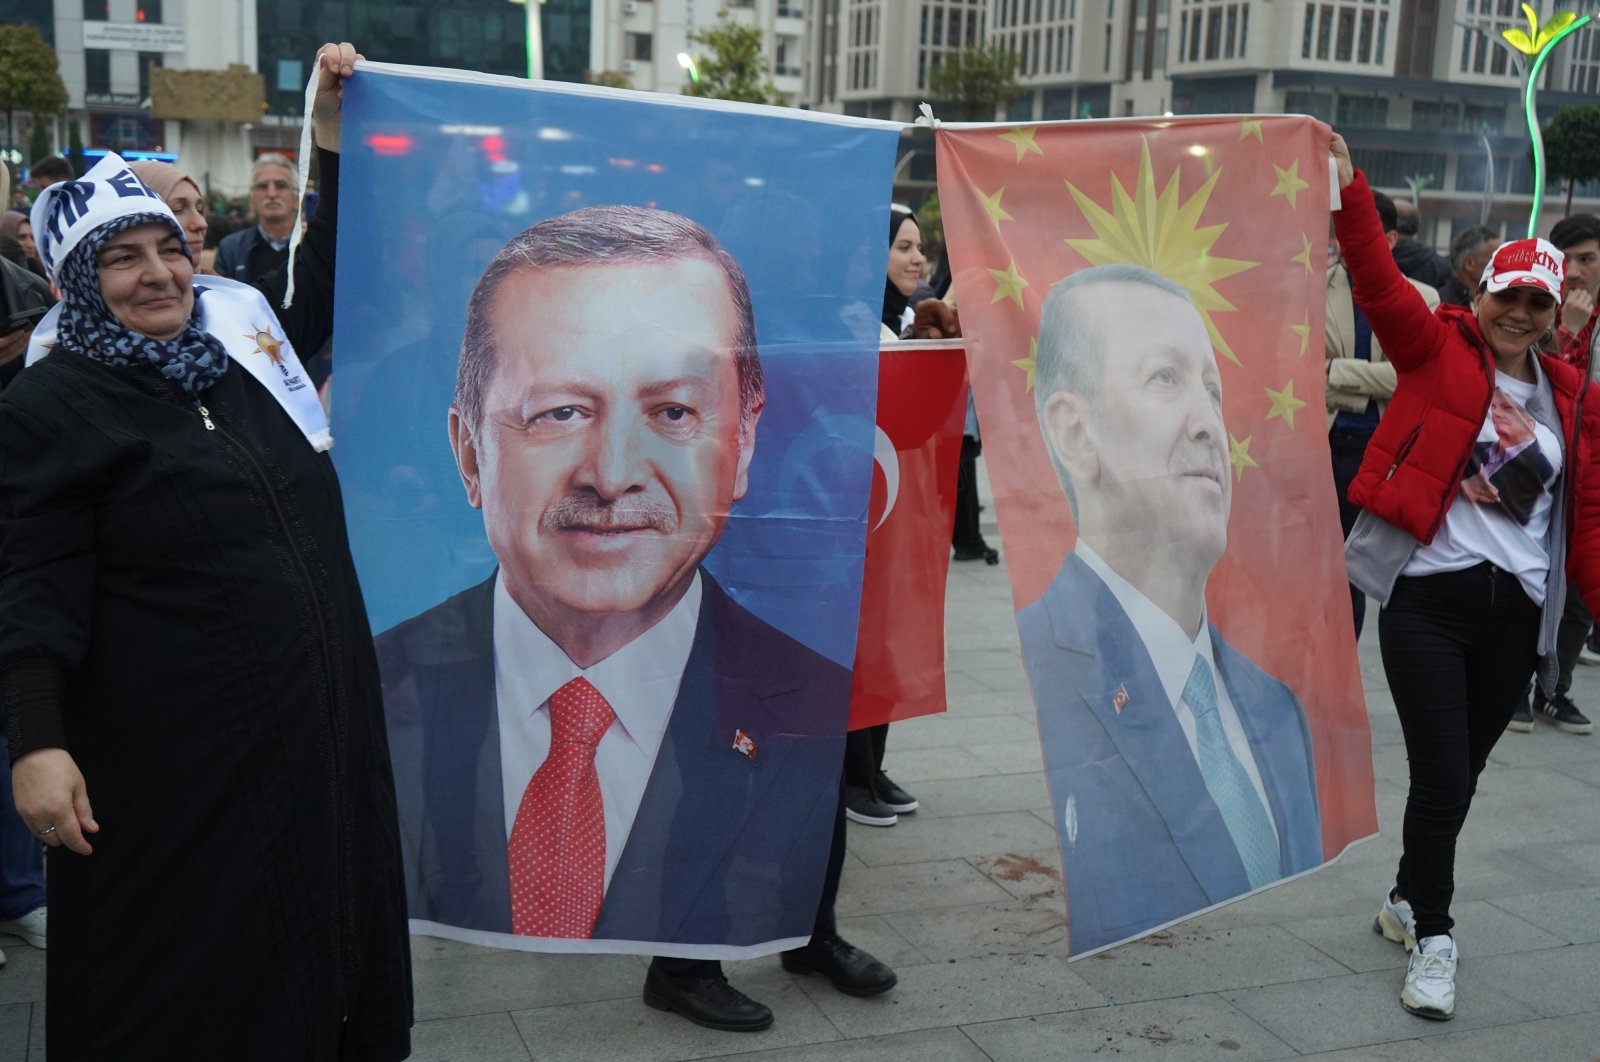 Supporters of President Recep Tayyip Erdoğan hold up flags of the president as they celebrate early victory in exit poll results for the presidential runoff in Rize, Türkiye, May 28, 2023. (IHA Photo)